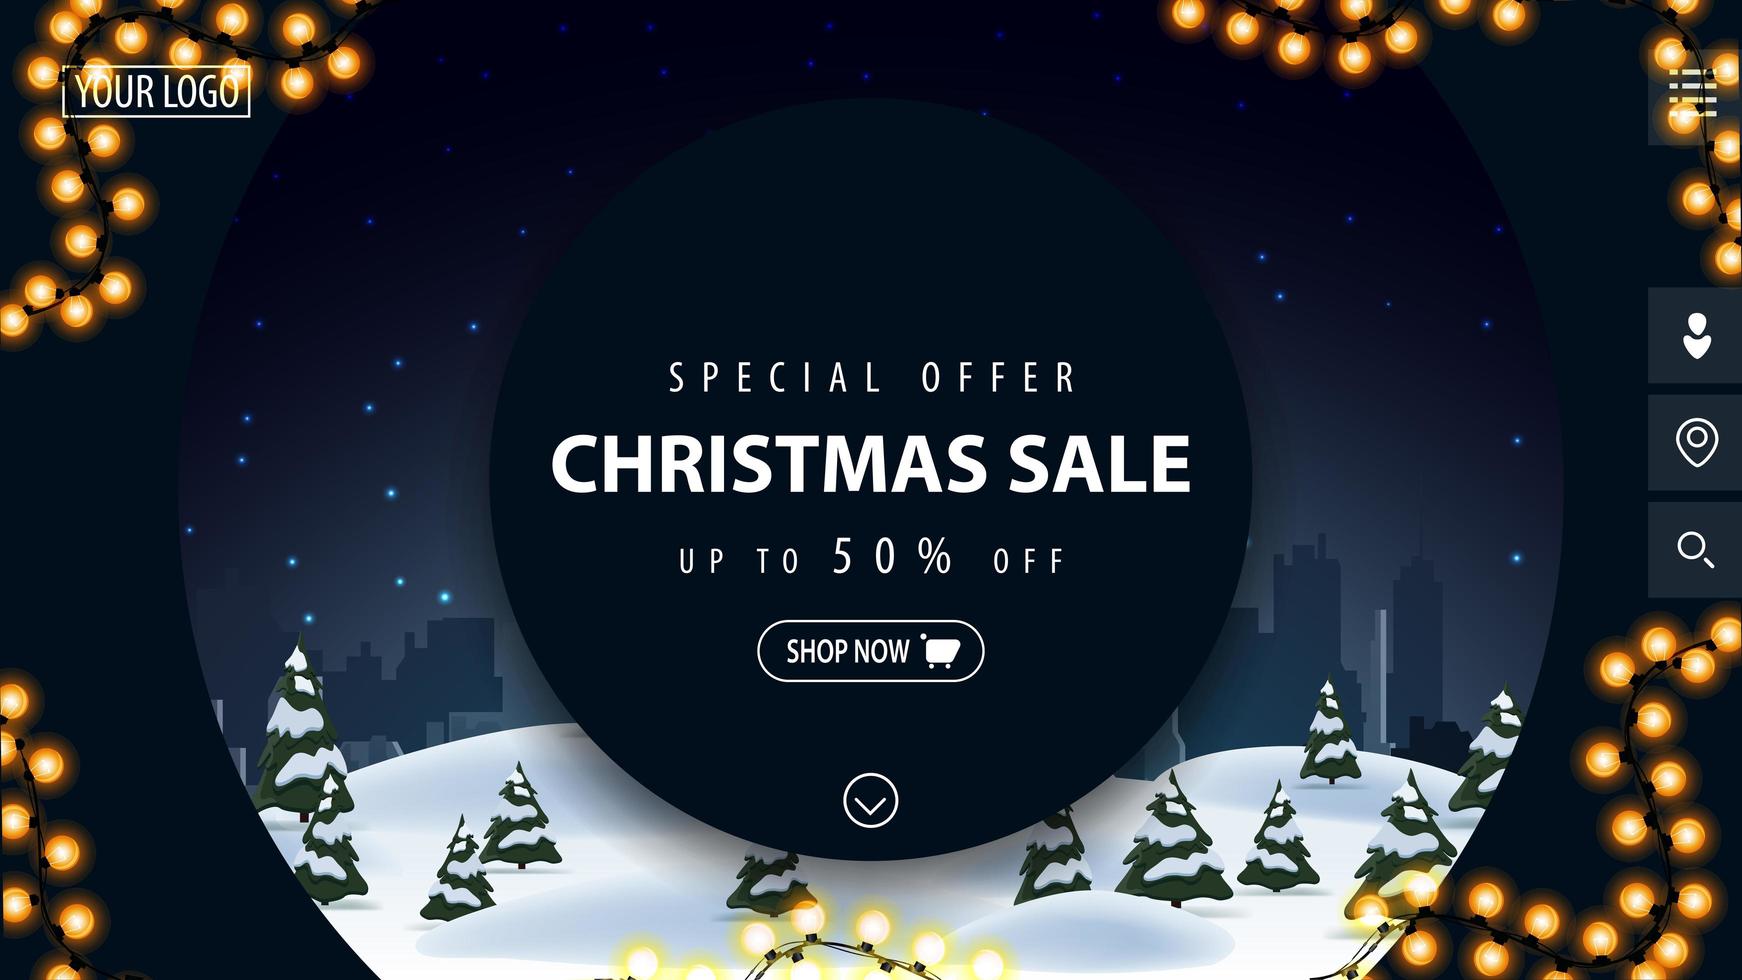 Special offer, Christmas sale, up to 50 off, beautiful blue modern discount banner with big decorative circles and winter landscape on background vector